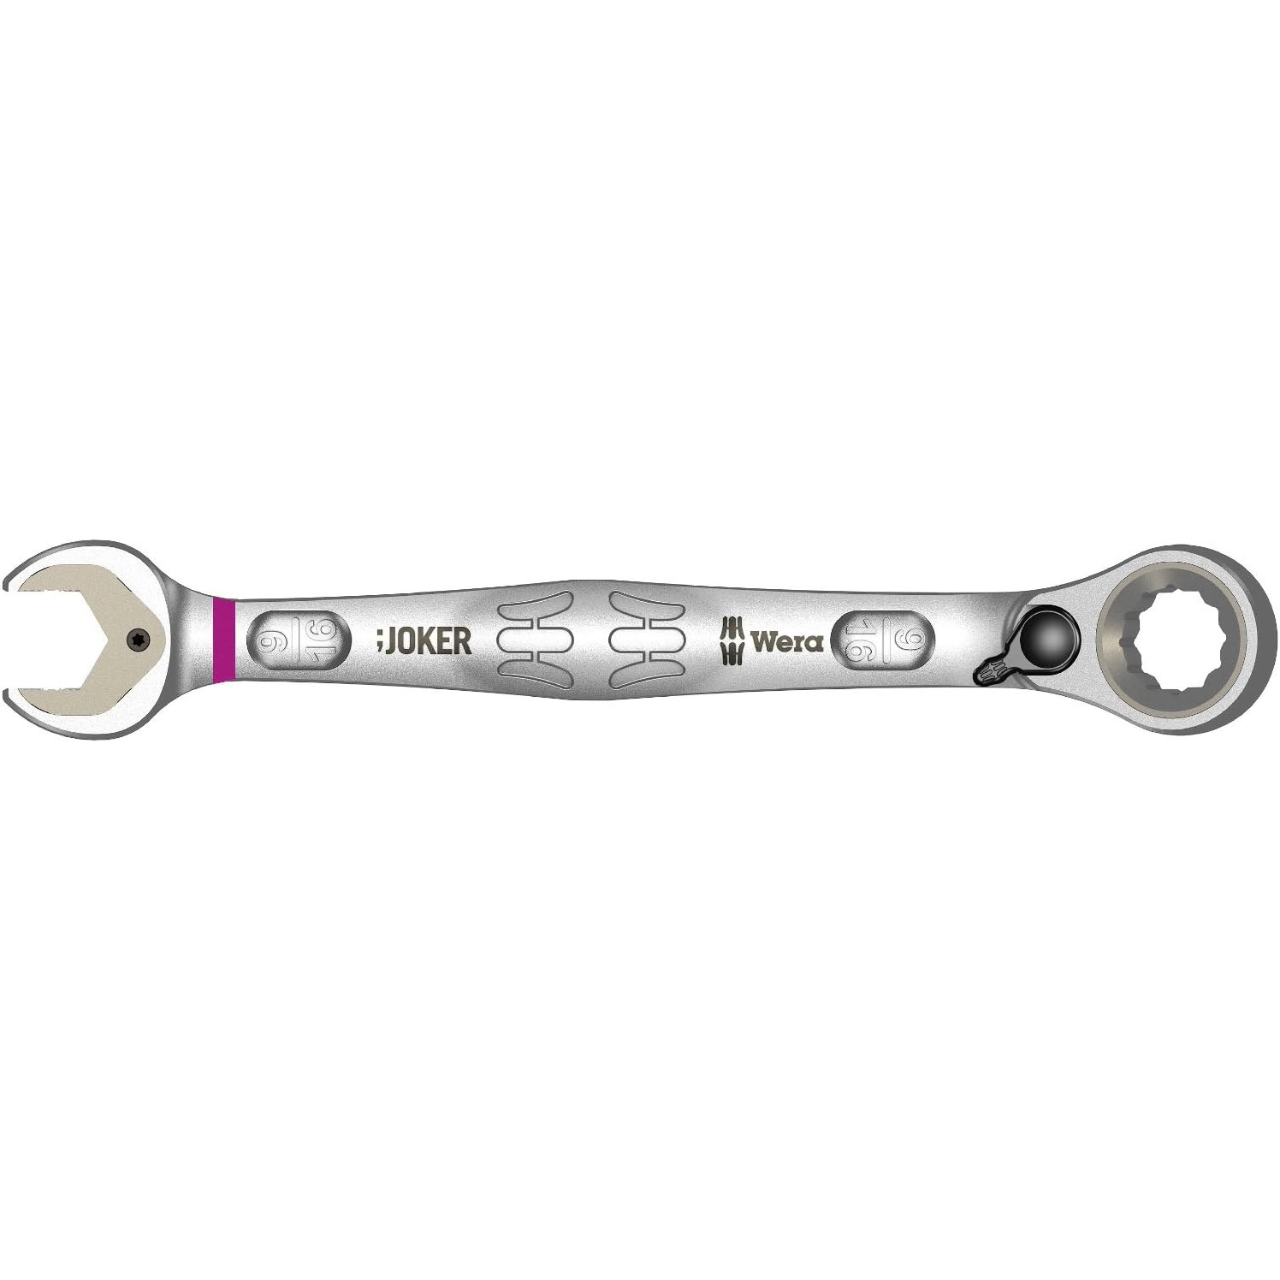 WERA 6001 Joker Switch Ratcheting combination wrench, with switch lever, imperial 9/16"x187mm